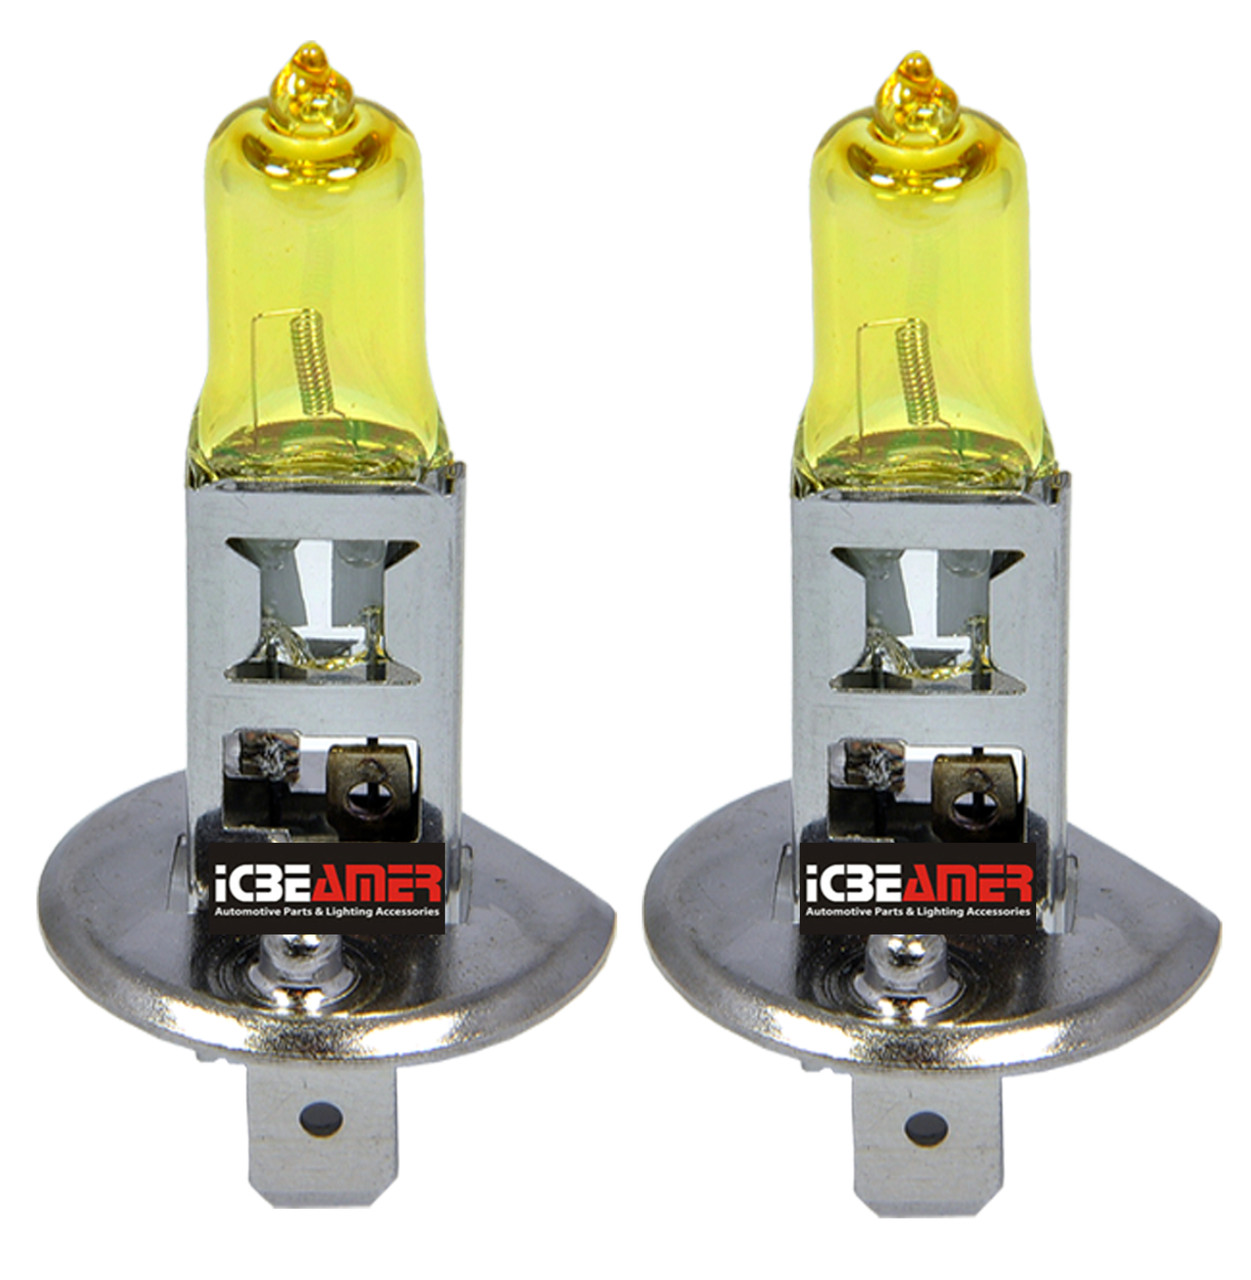 ICBEAMER H1 12v 100W Direct Replace Can Fit Auto 64152 31393 64150 OEM  Factory Halogen Light Bulbs [Color: Yellow] - ICBEAMER